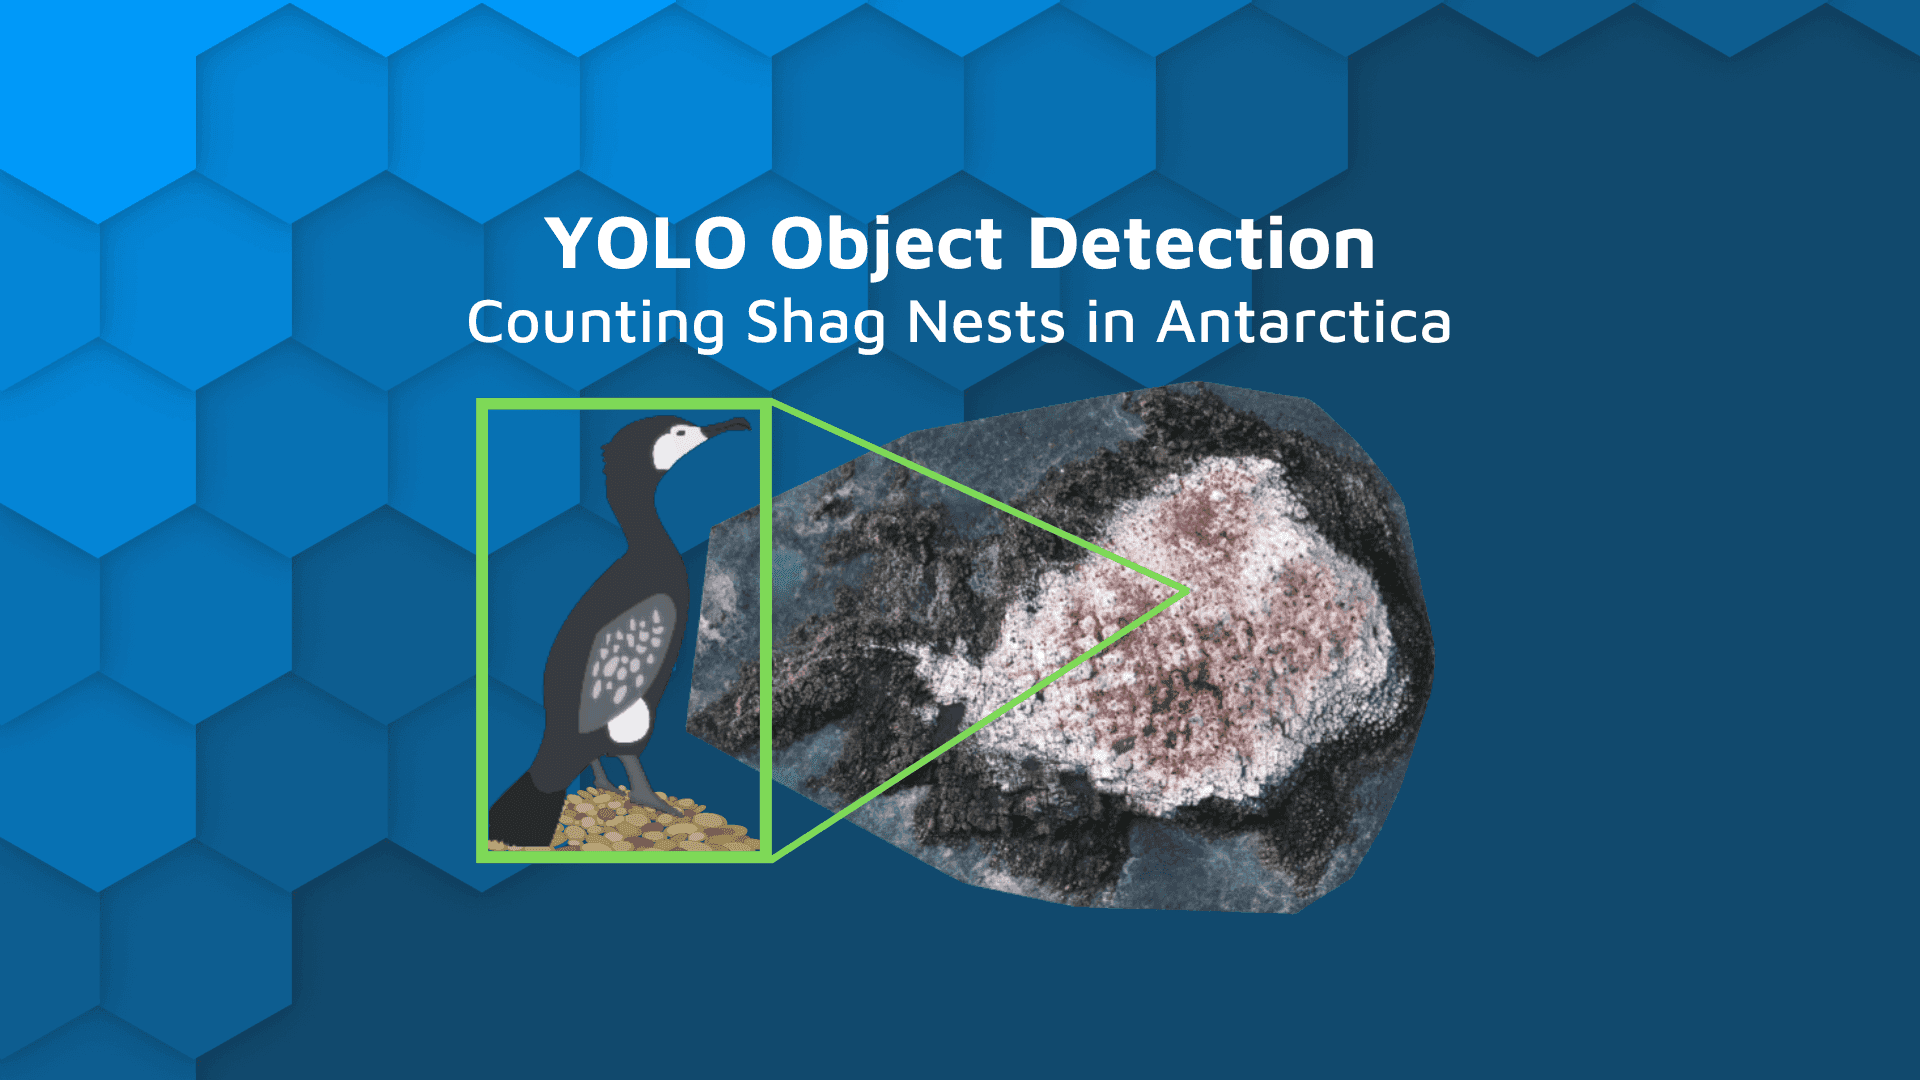 Classifying Antarctic Shag Nests from remotely sensed drone imagery using Computer Vision and YOLO